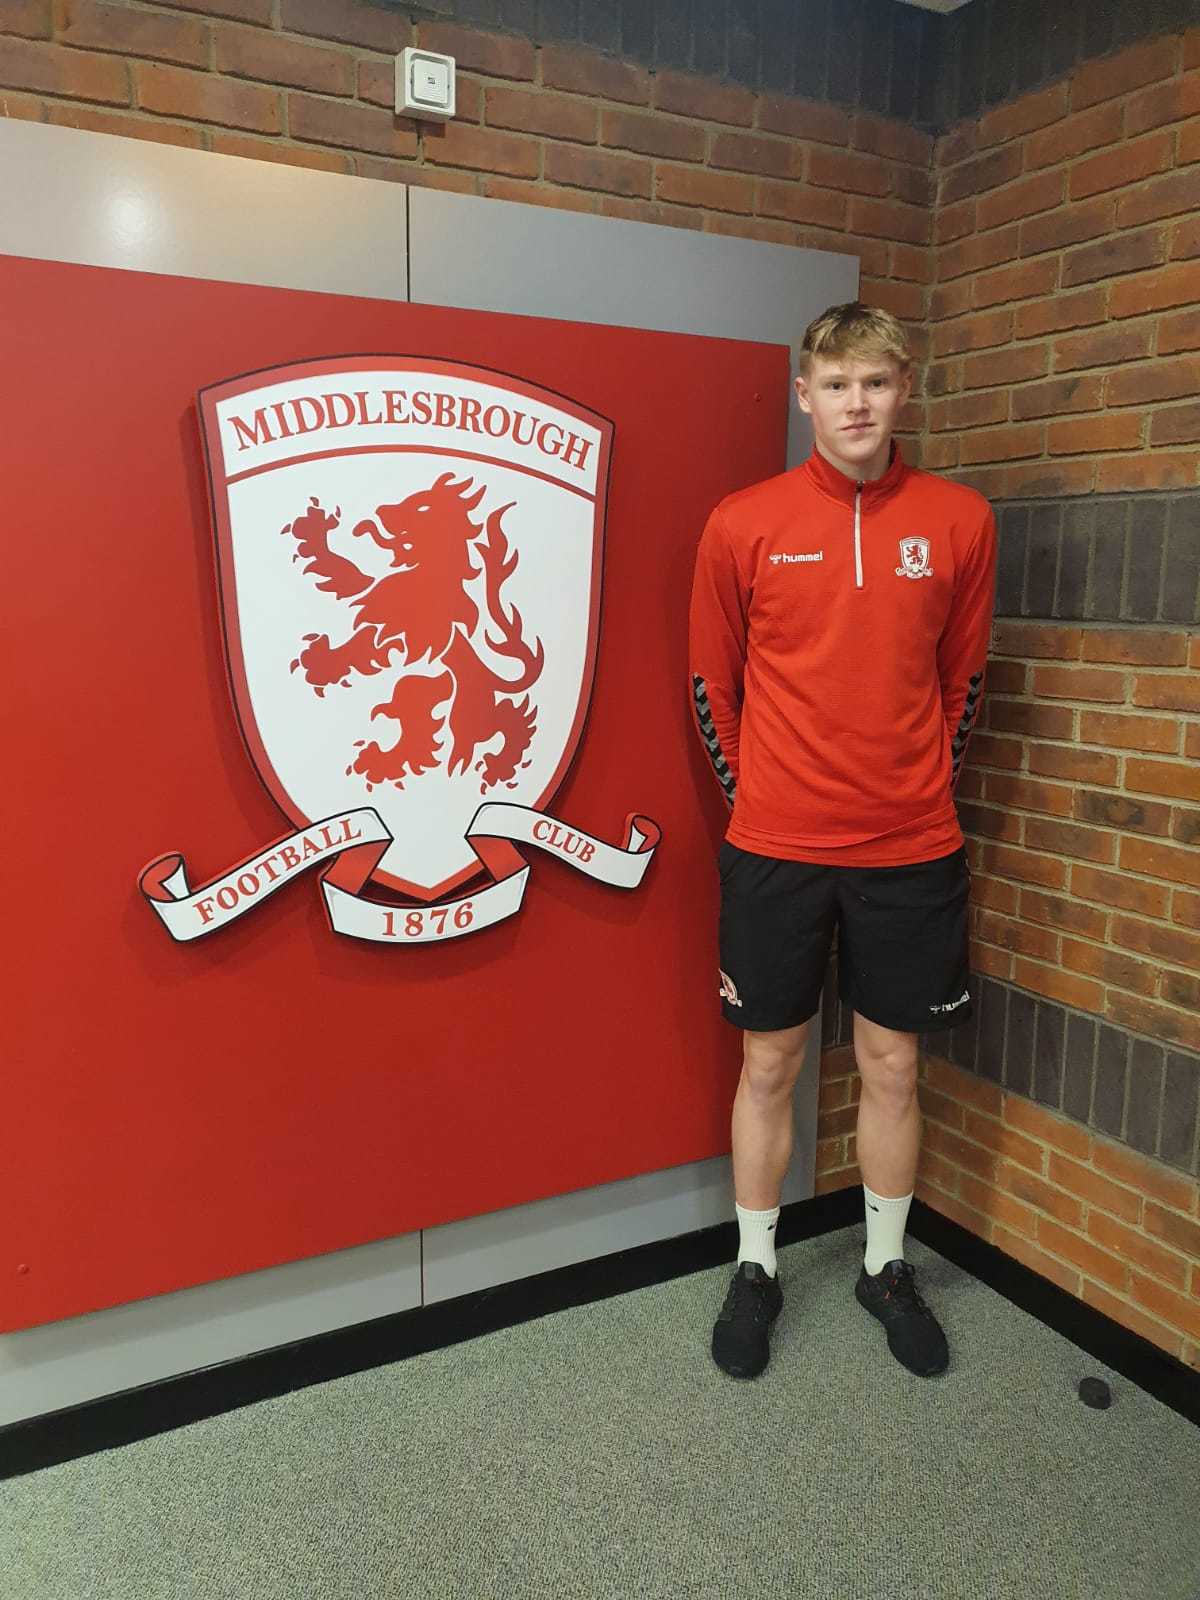 Josh achieves his dream signing for Middlesbrough Football Club